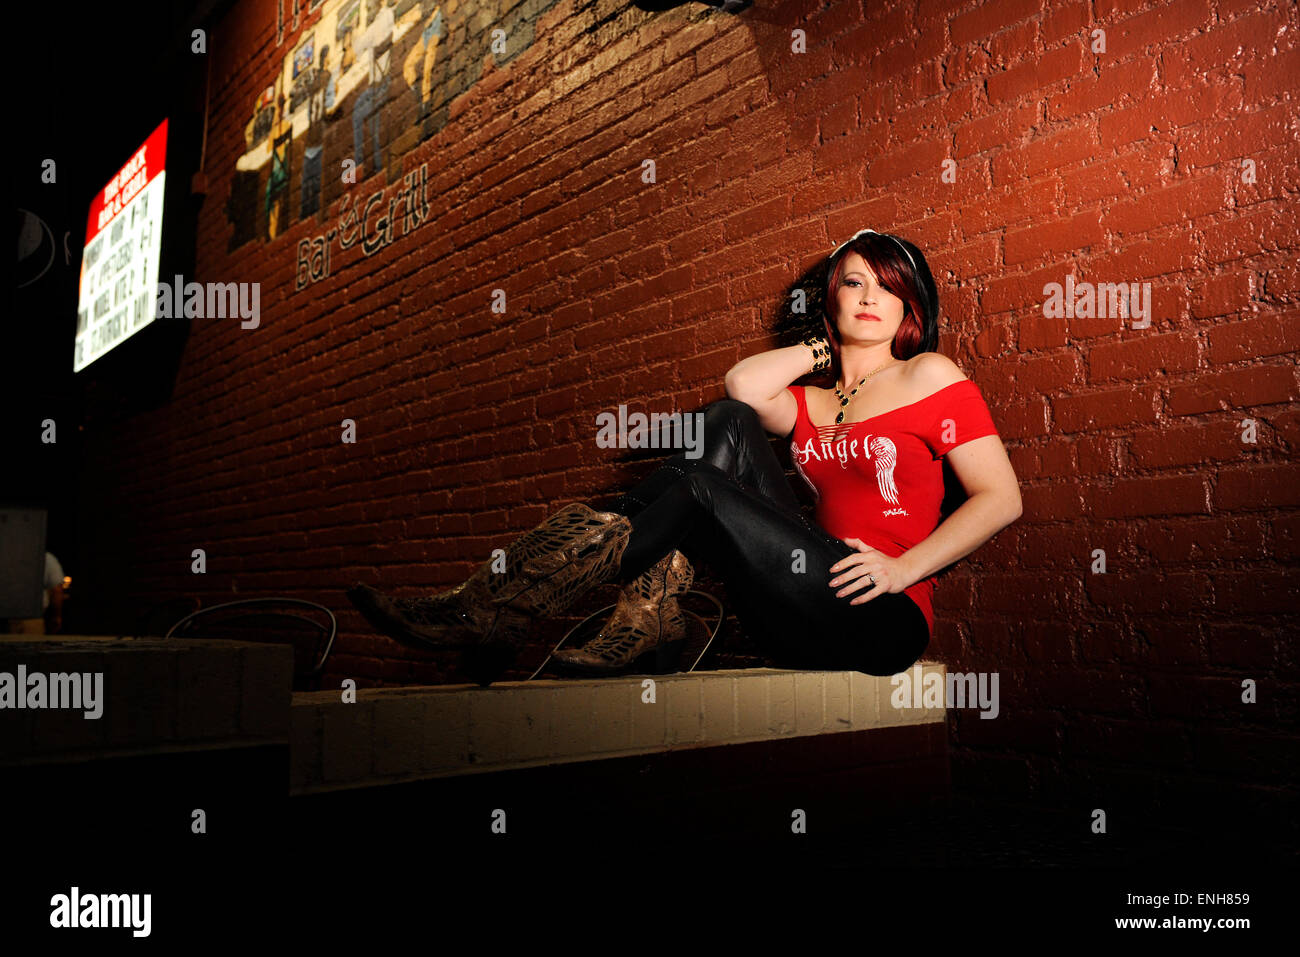 Model standing outside of a bar with Marquee and business sign Stock Photo